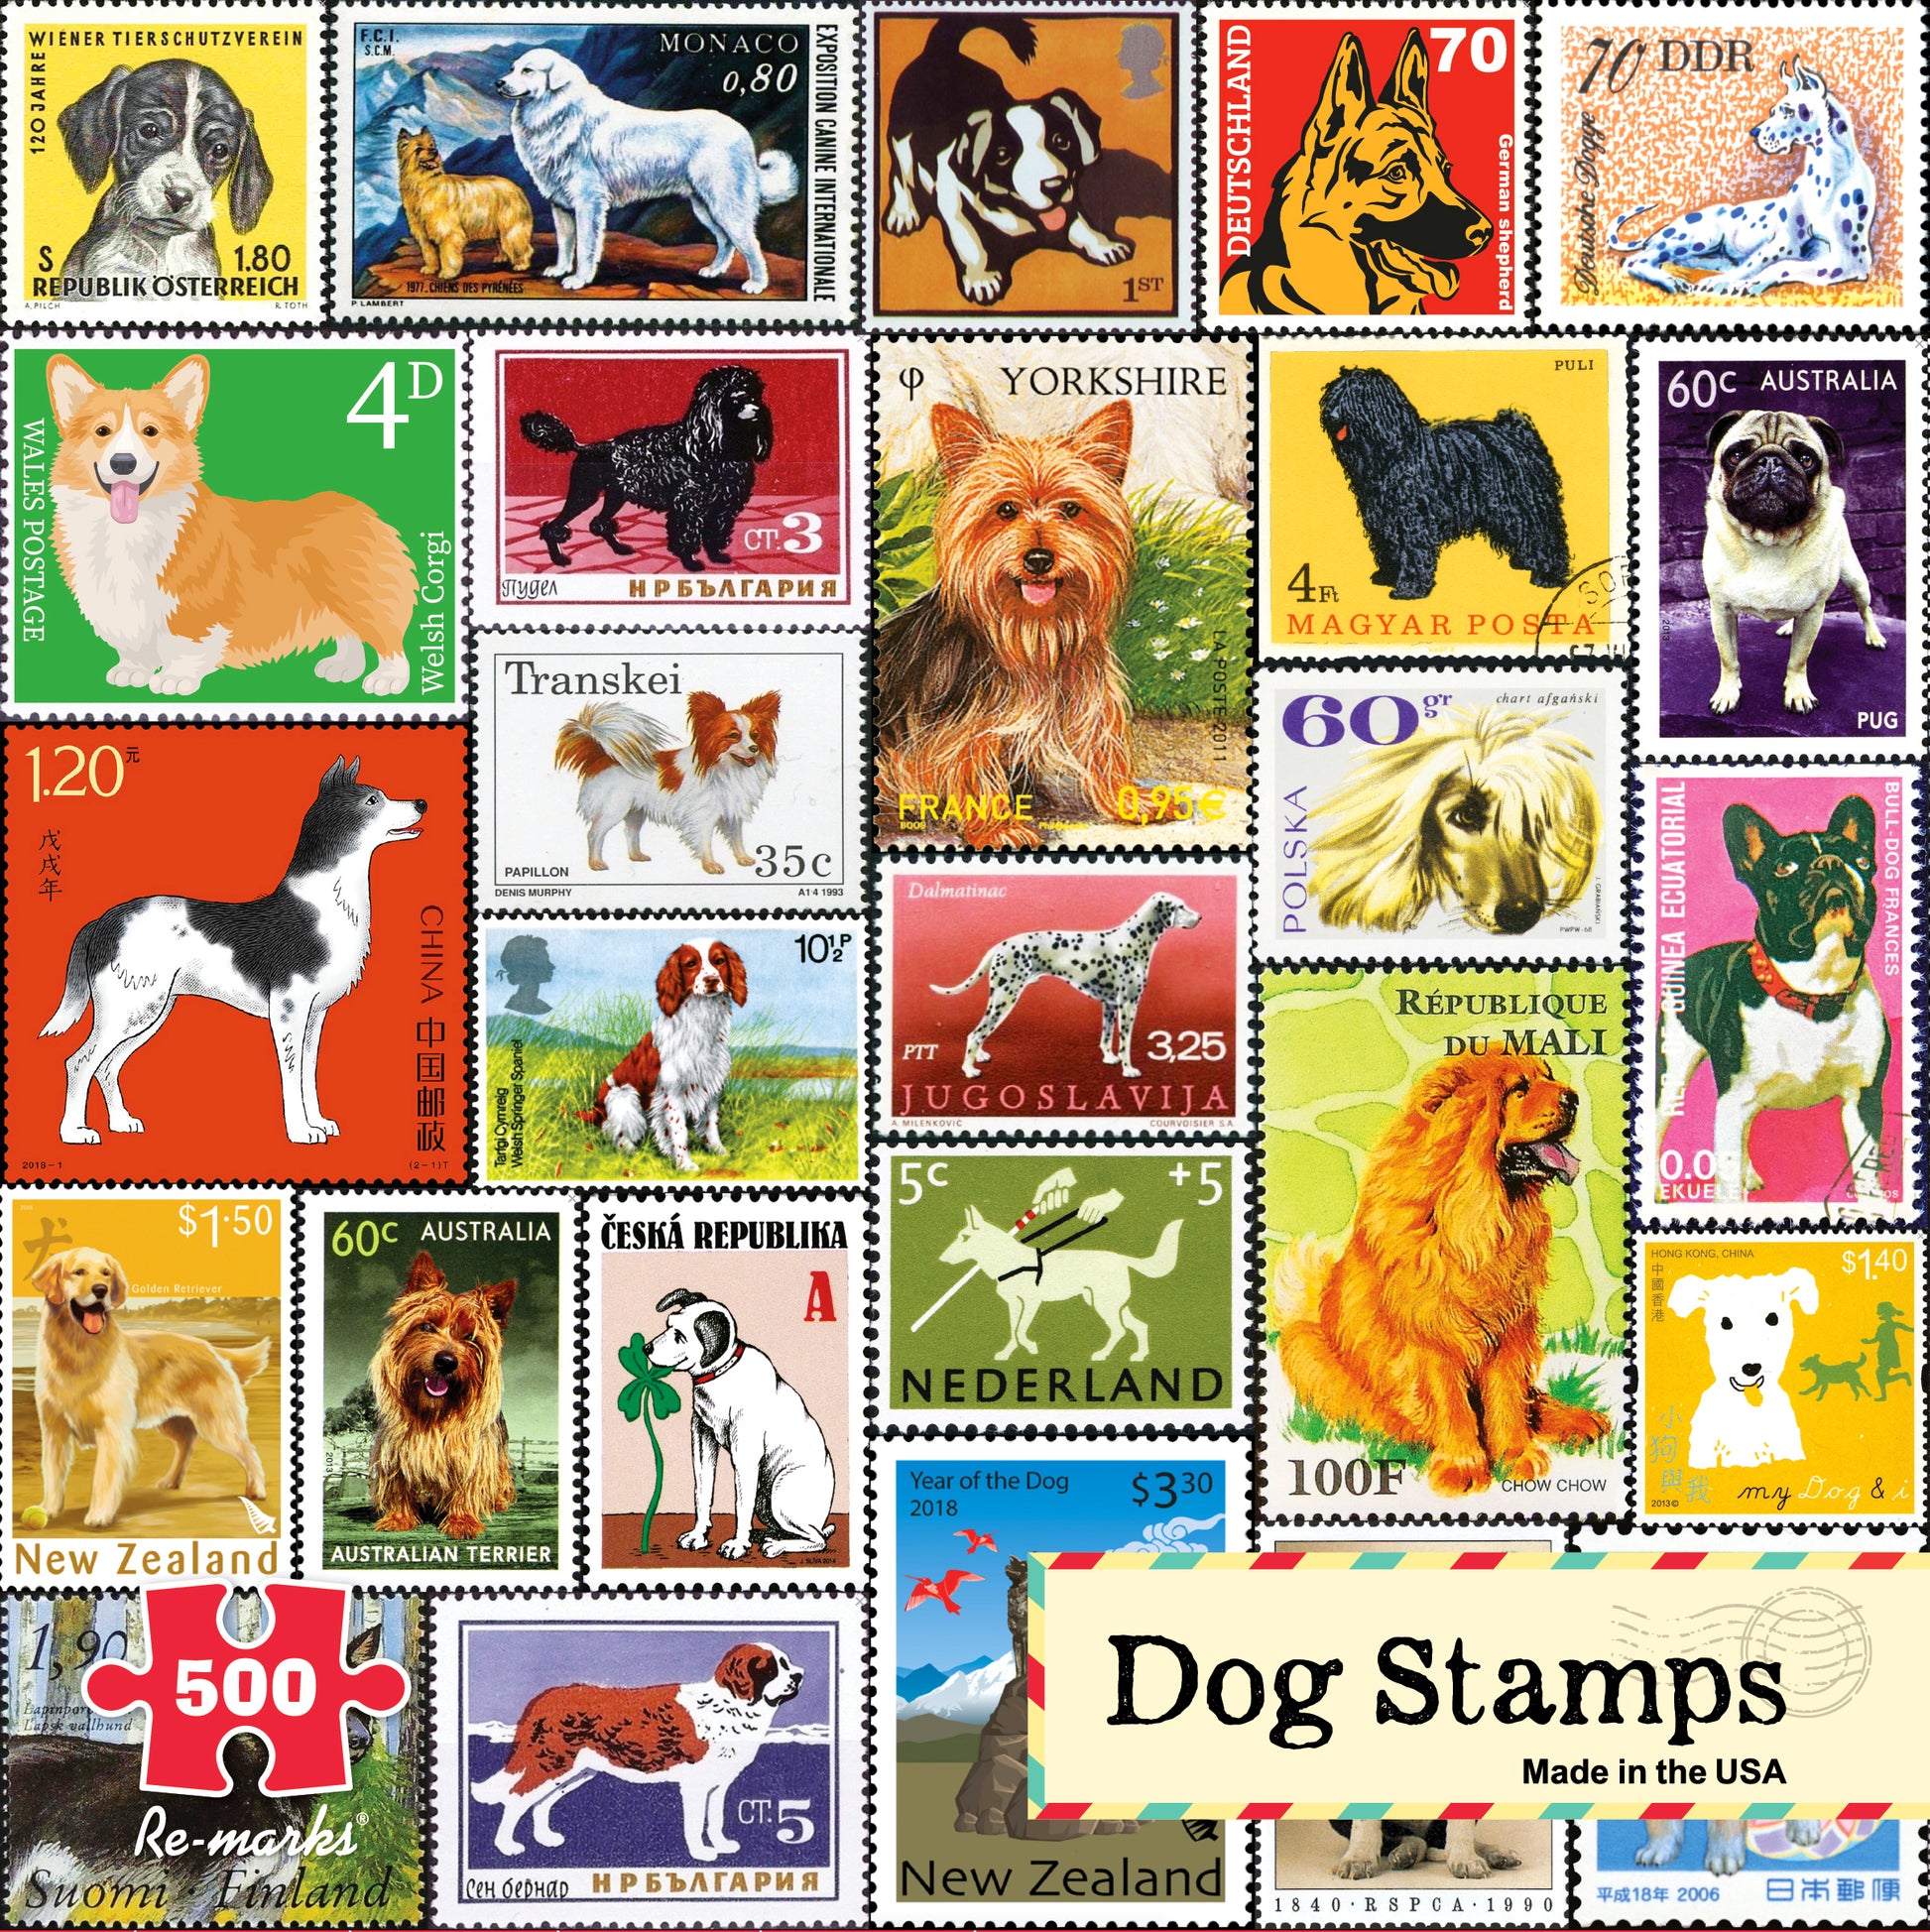 Love Letters Stamps Collage 1000-Piece Jigsaw Puzzle – Re-marks, Inc.